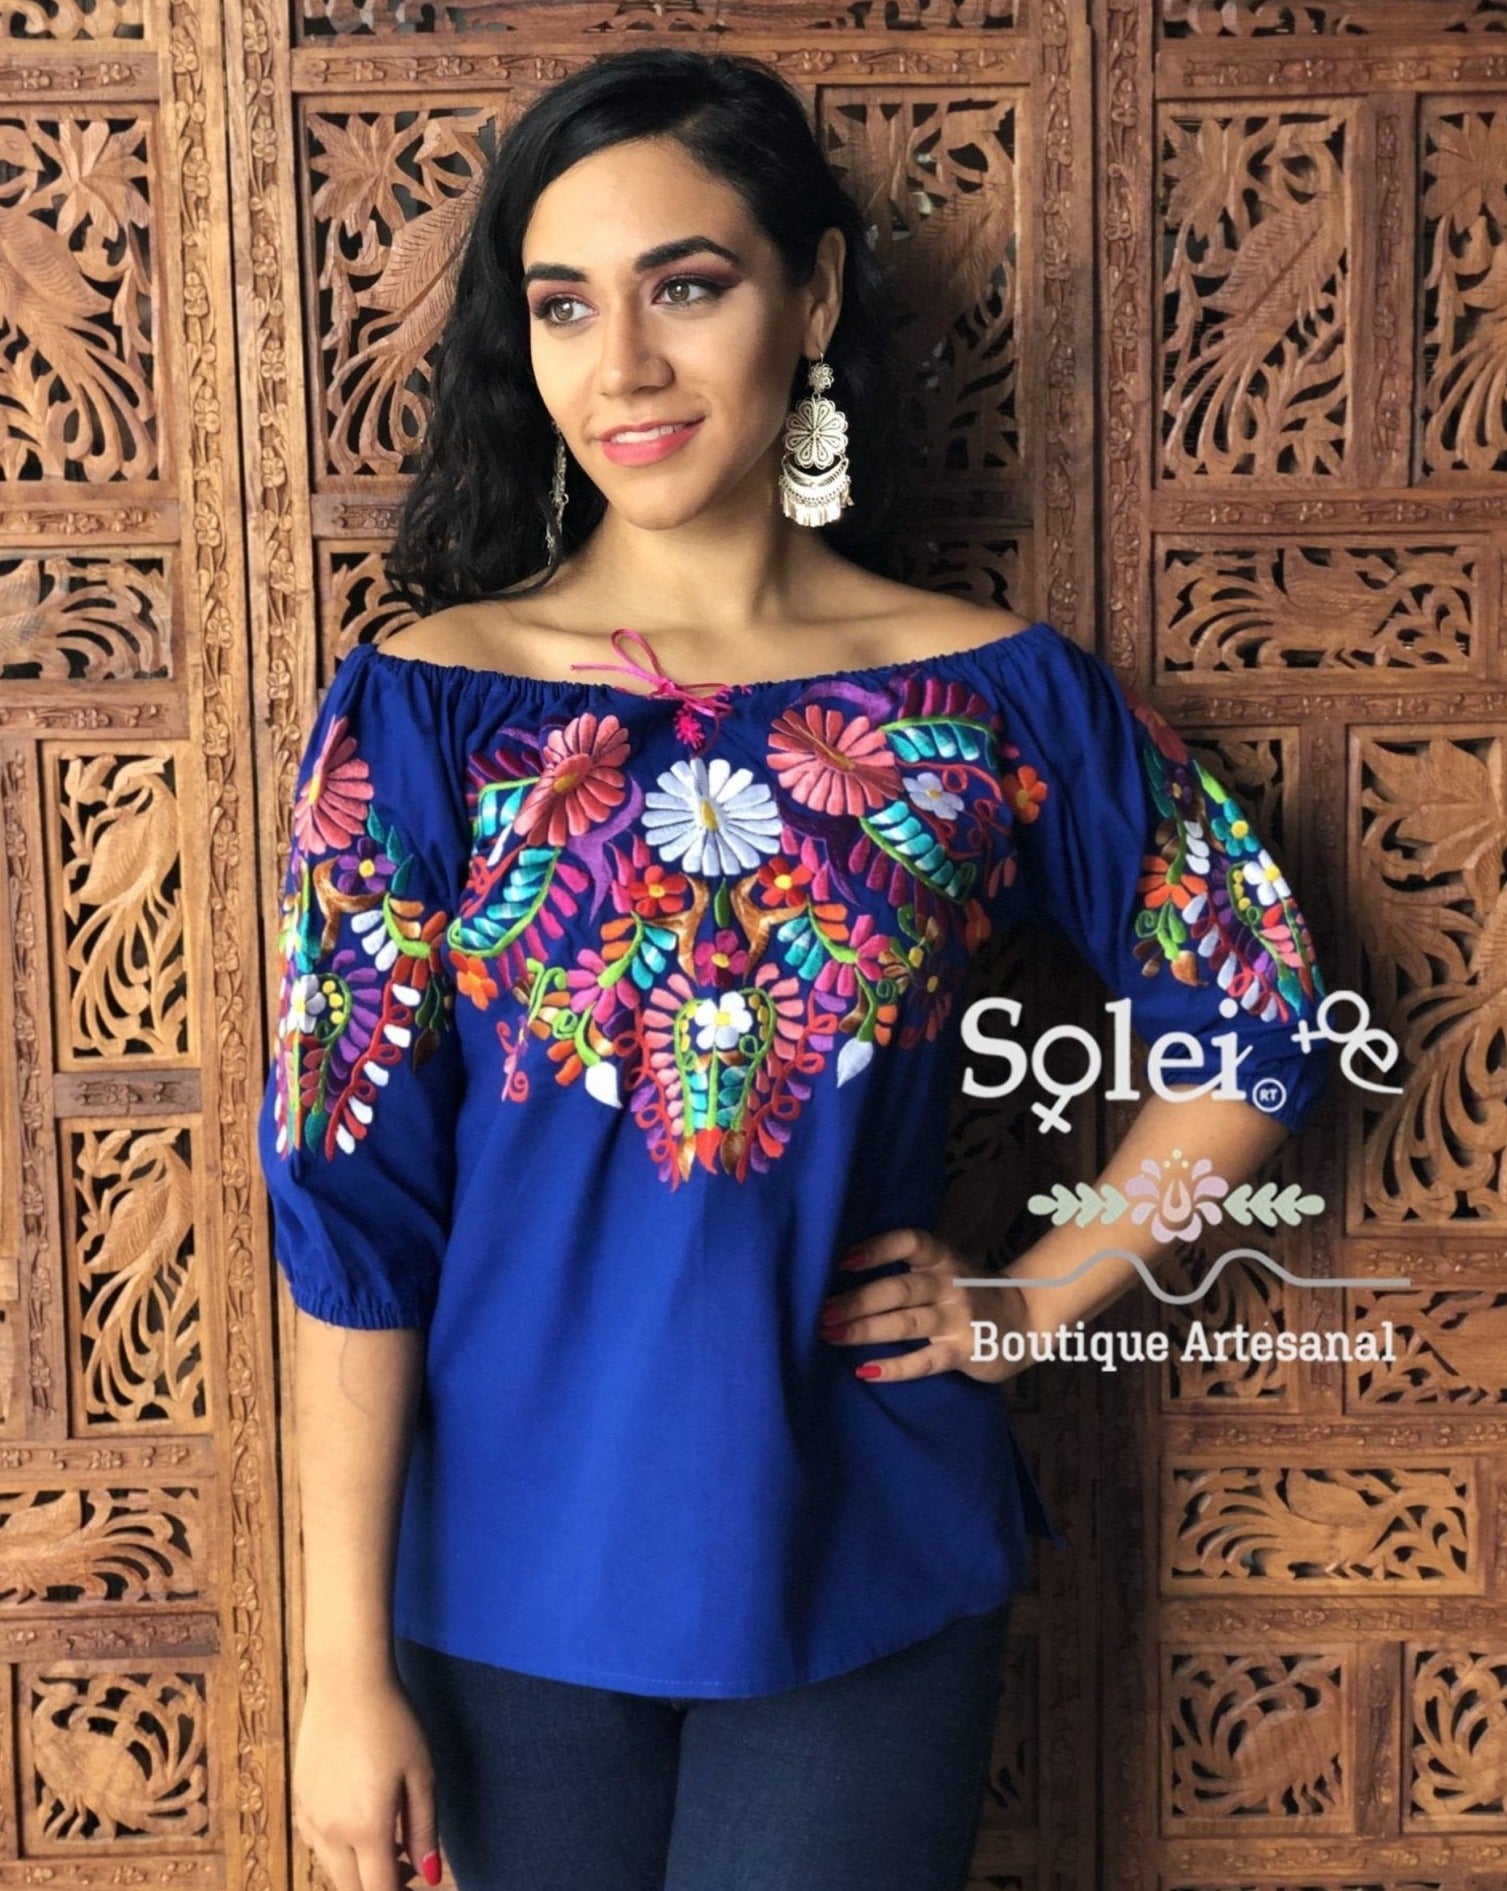 Andrea Blouse 3/4 sleeve smocked off-the-shoulder blouse, casual and formal blouse, great for all types look. - Solei Store